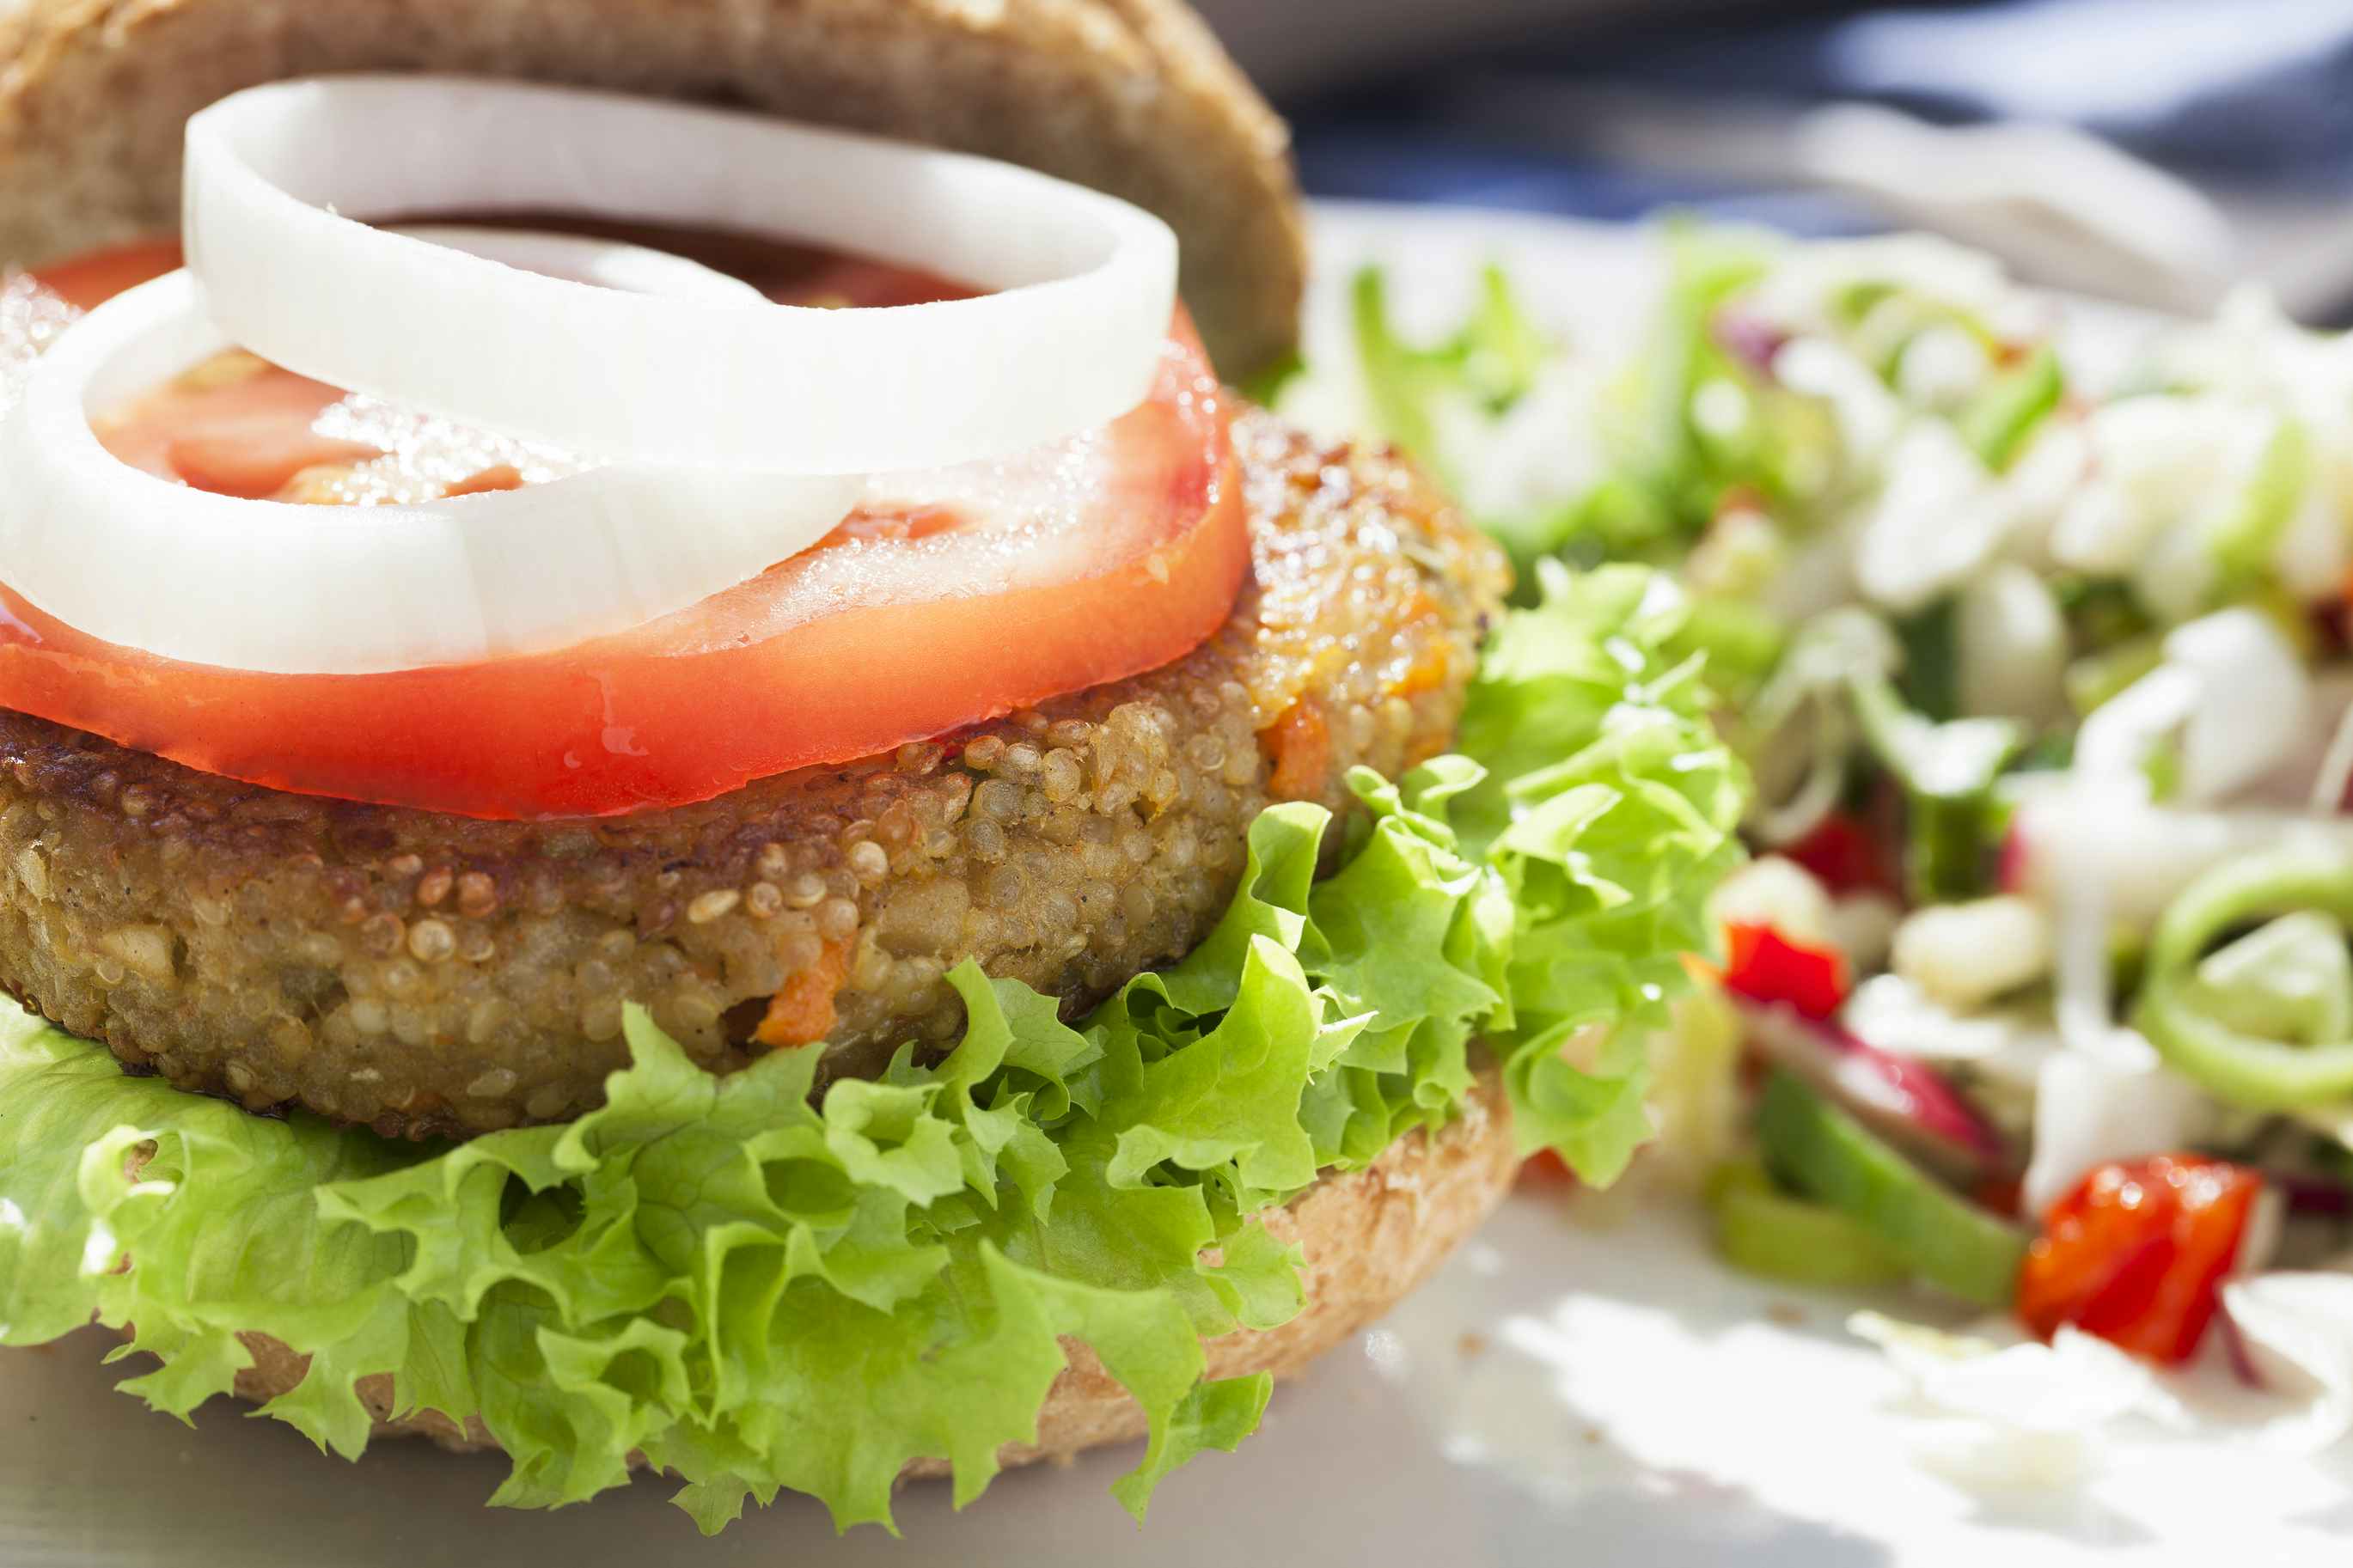 A close up on a burger made with quinoa